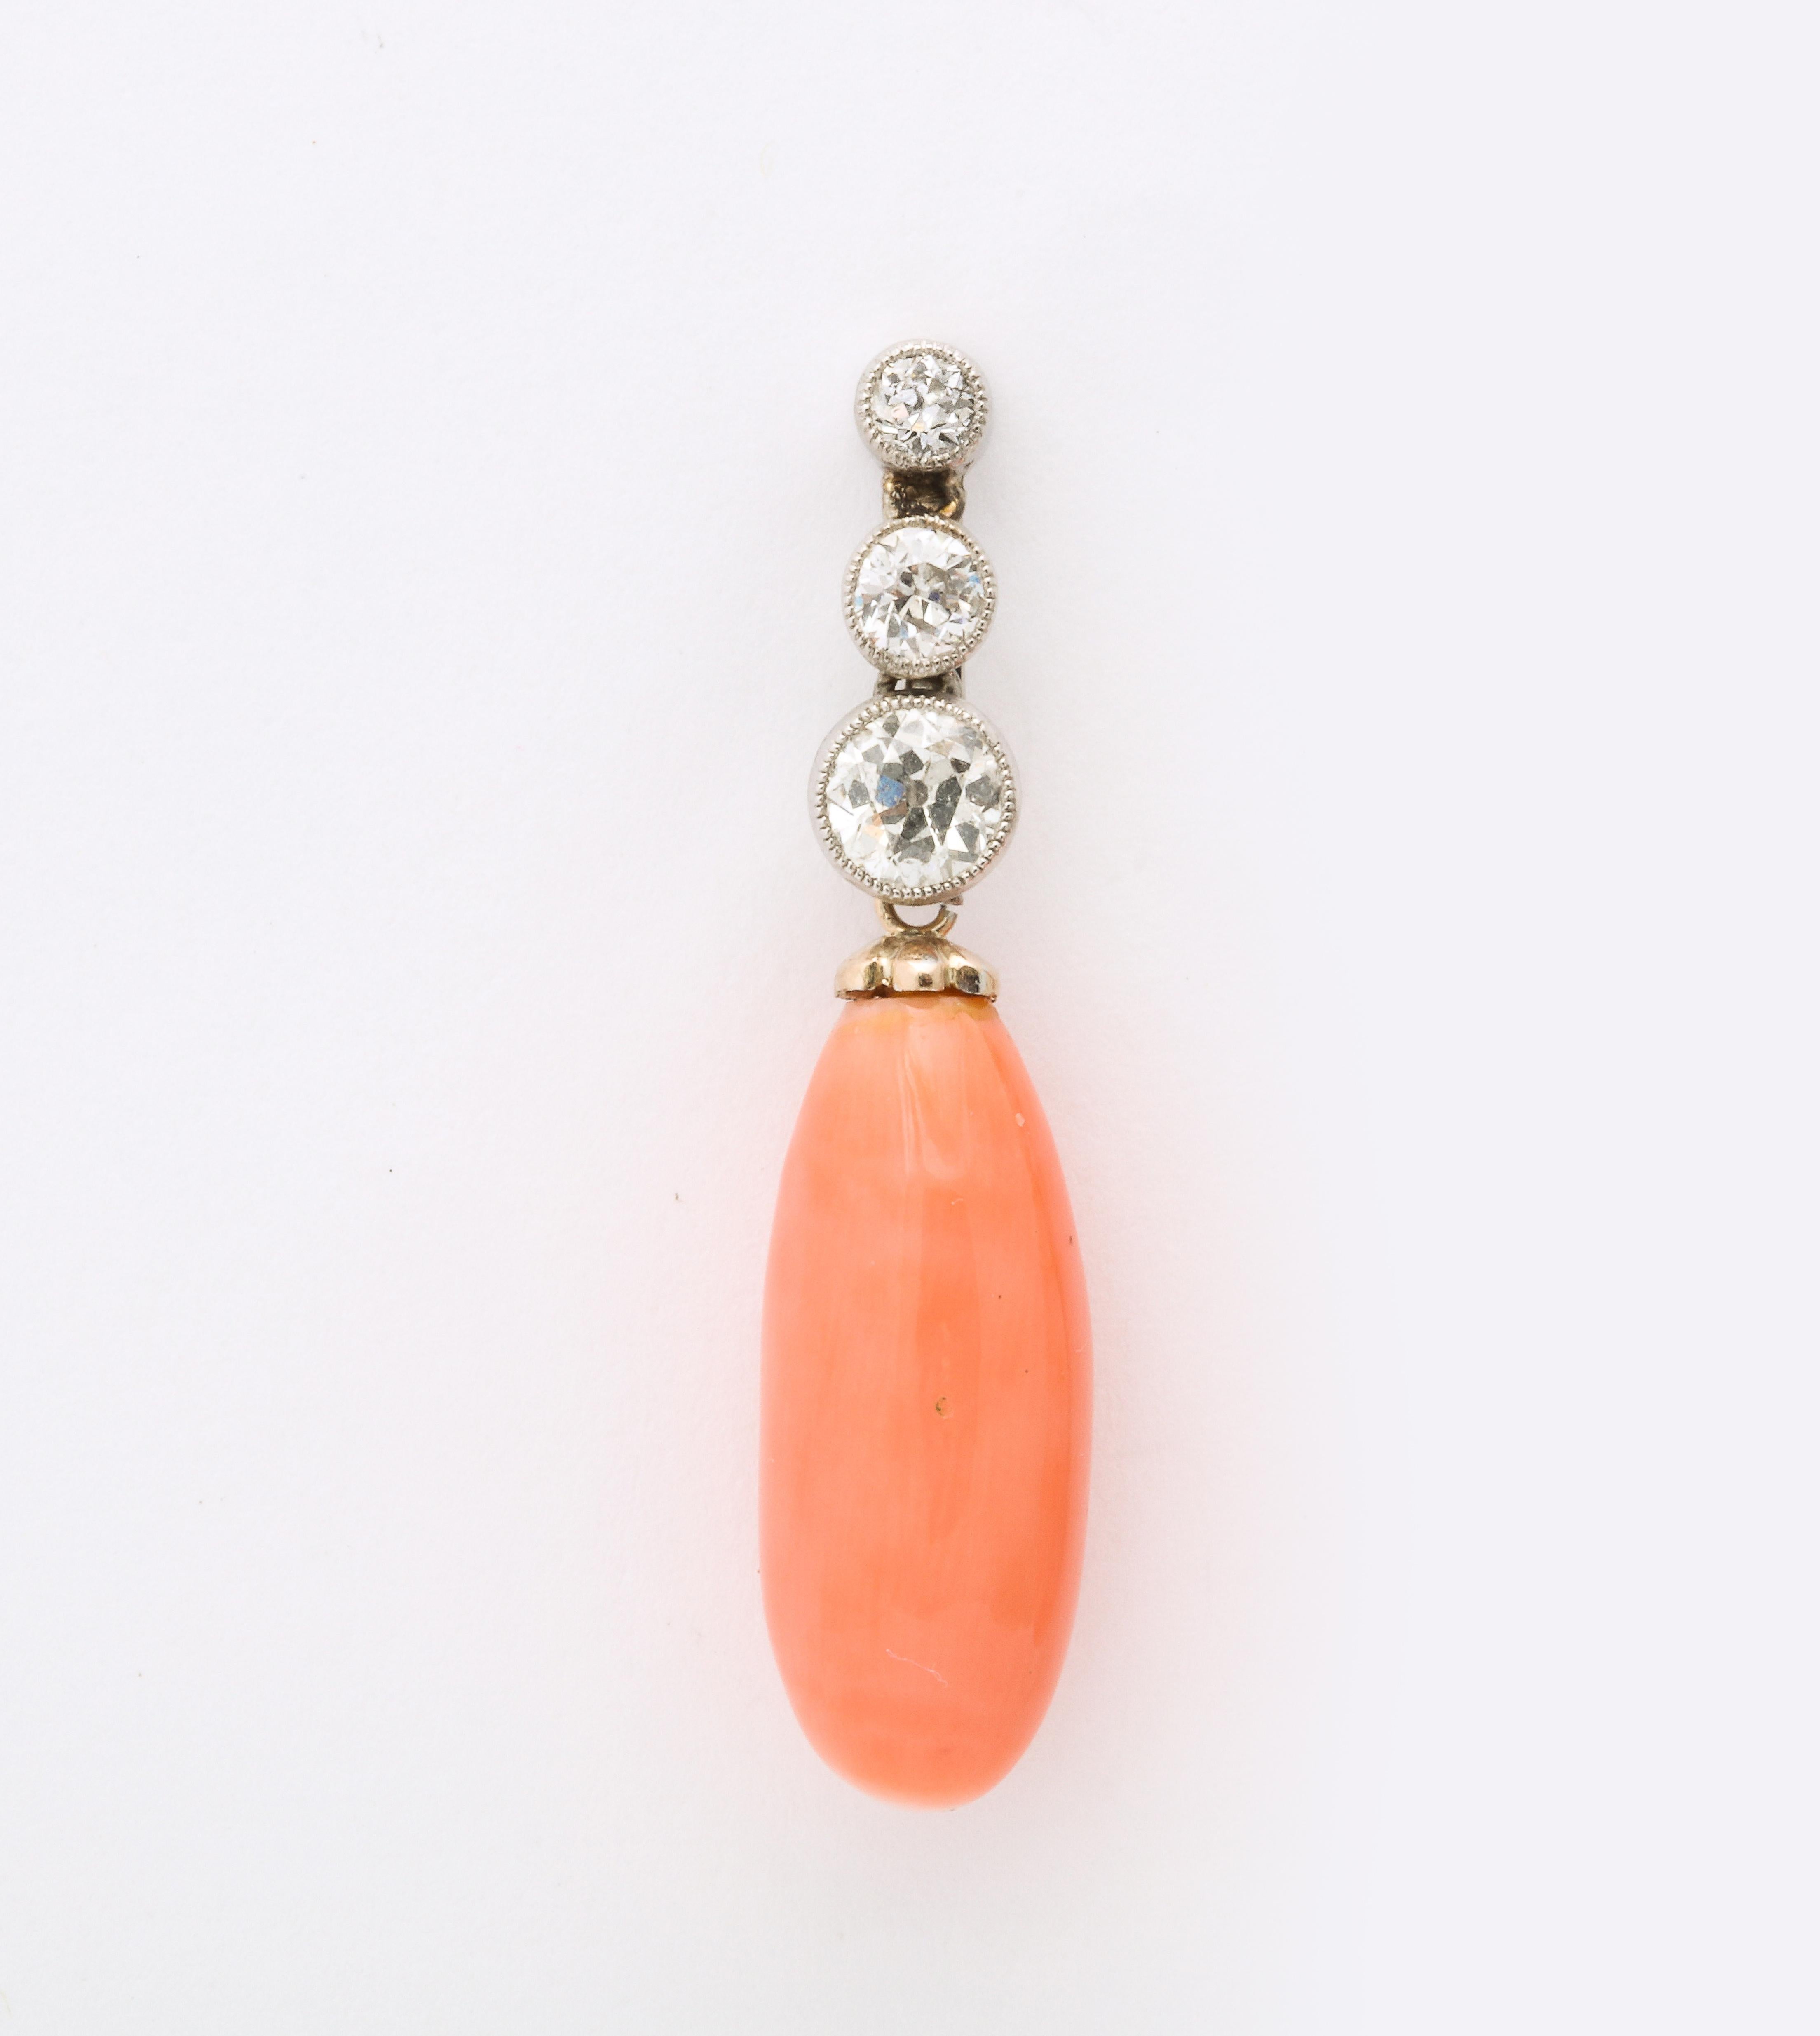 One Ladies Pair Of  Circa 1920's Platinum And 18kt Gold Drop Earrings Designed With Two Angel Skin Coral Drops Measuring Approximately 18MM Each. Top Of Earrings Embellished With Six Old Cut Diamonds Beautifully Set Within A Milgrain Workmanship.